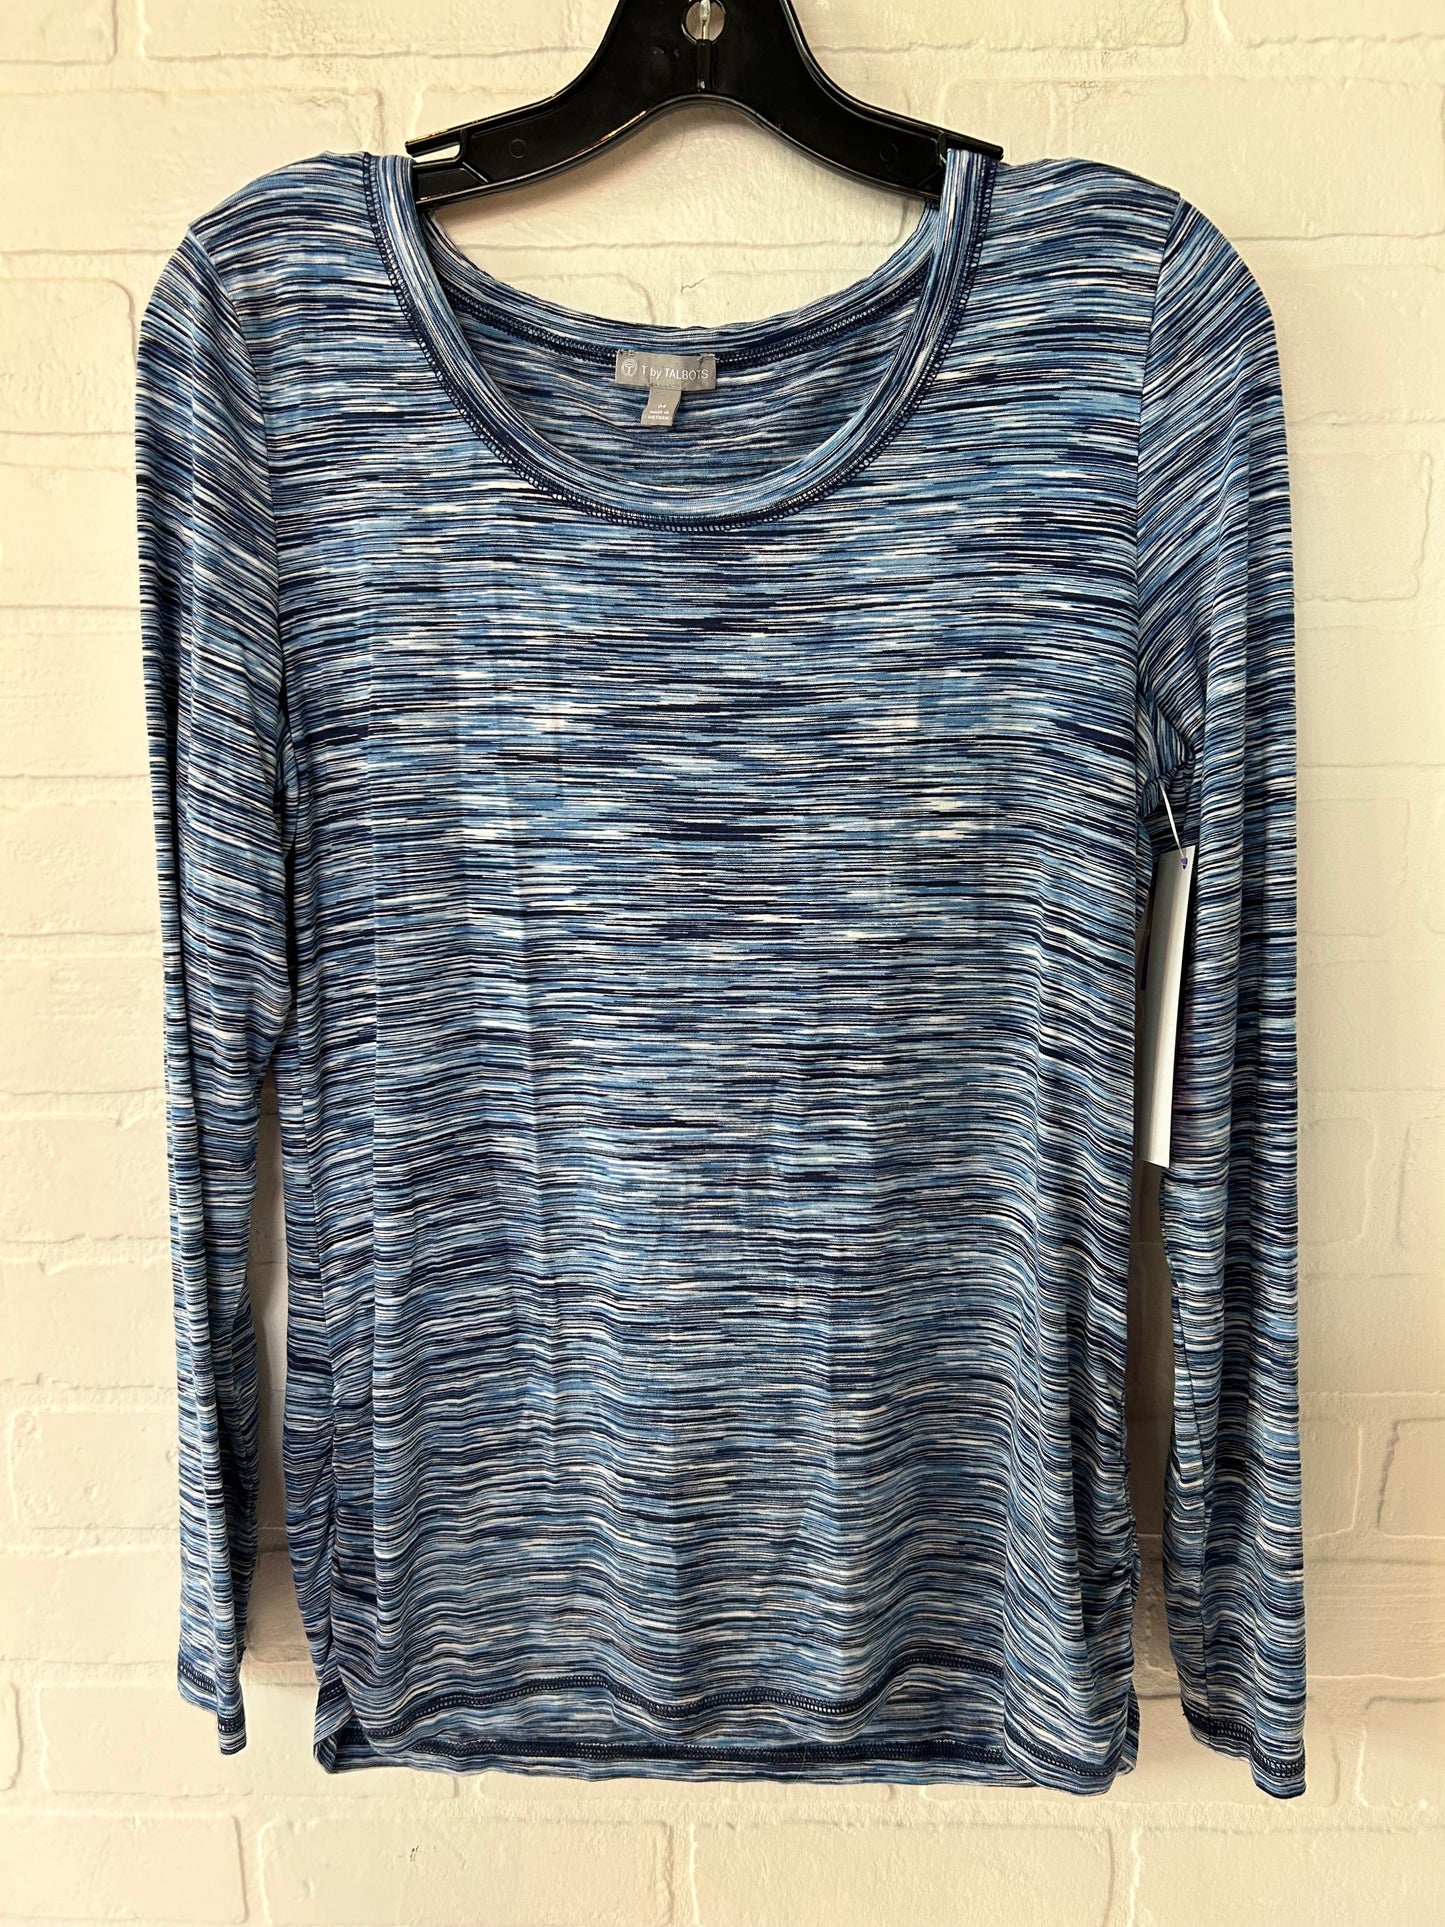 Athletic Top Long Sleeve Crewneck By Talbots  Size: M